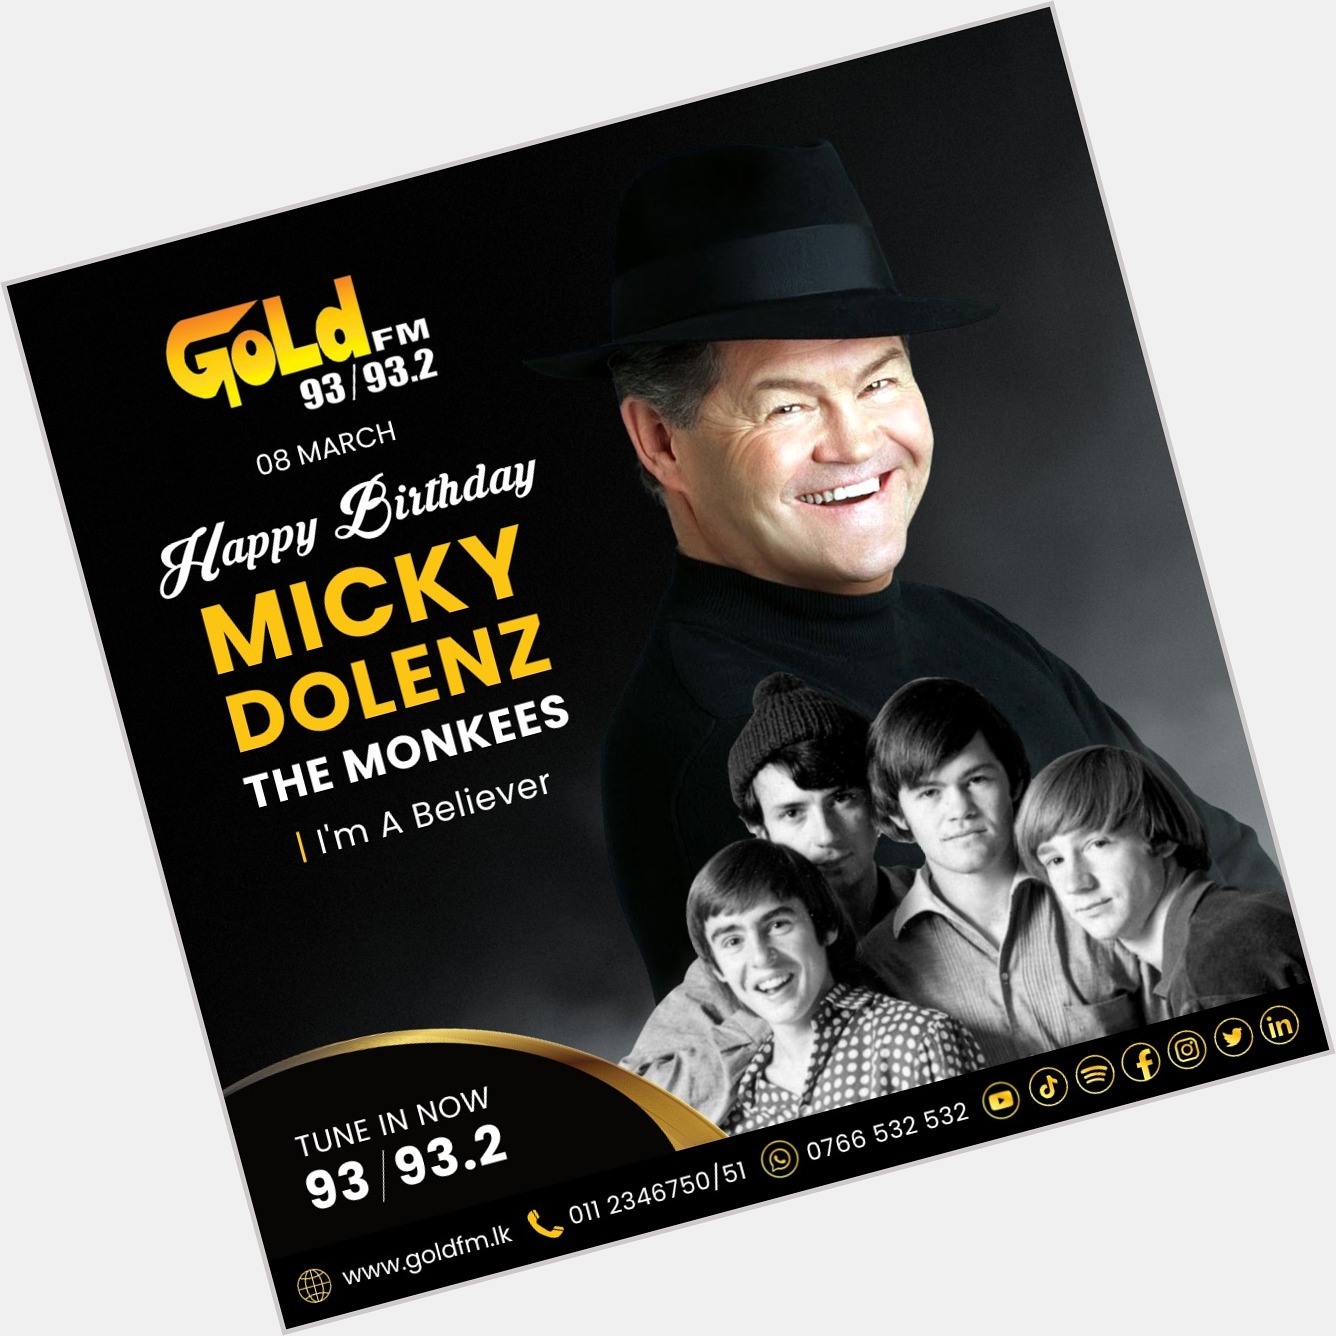 HAPPY BIRTHDAY TO MICKY DOLENZ TUNE IN NOW 93 / 93.2 Island wide      